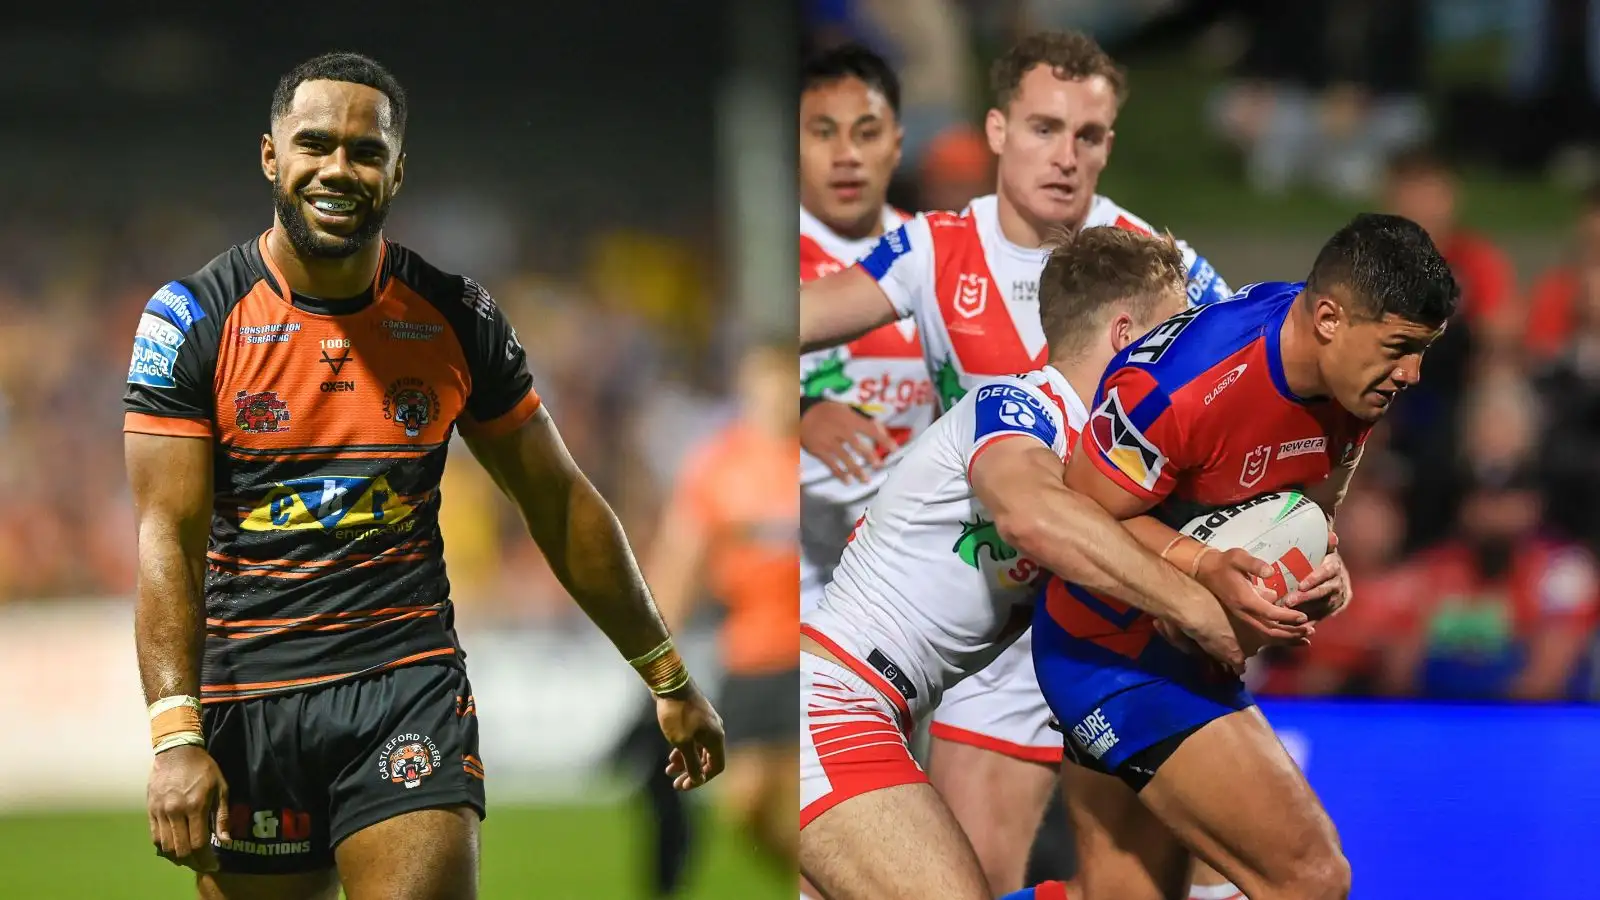 Castleford Tigers ace & new Hull FC signing on scoresheet as Australia and Fiji win Pacific Championships finals dress rehearsals